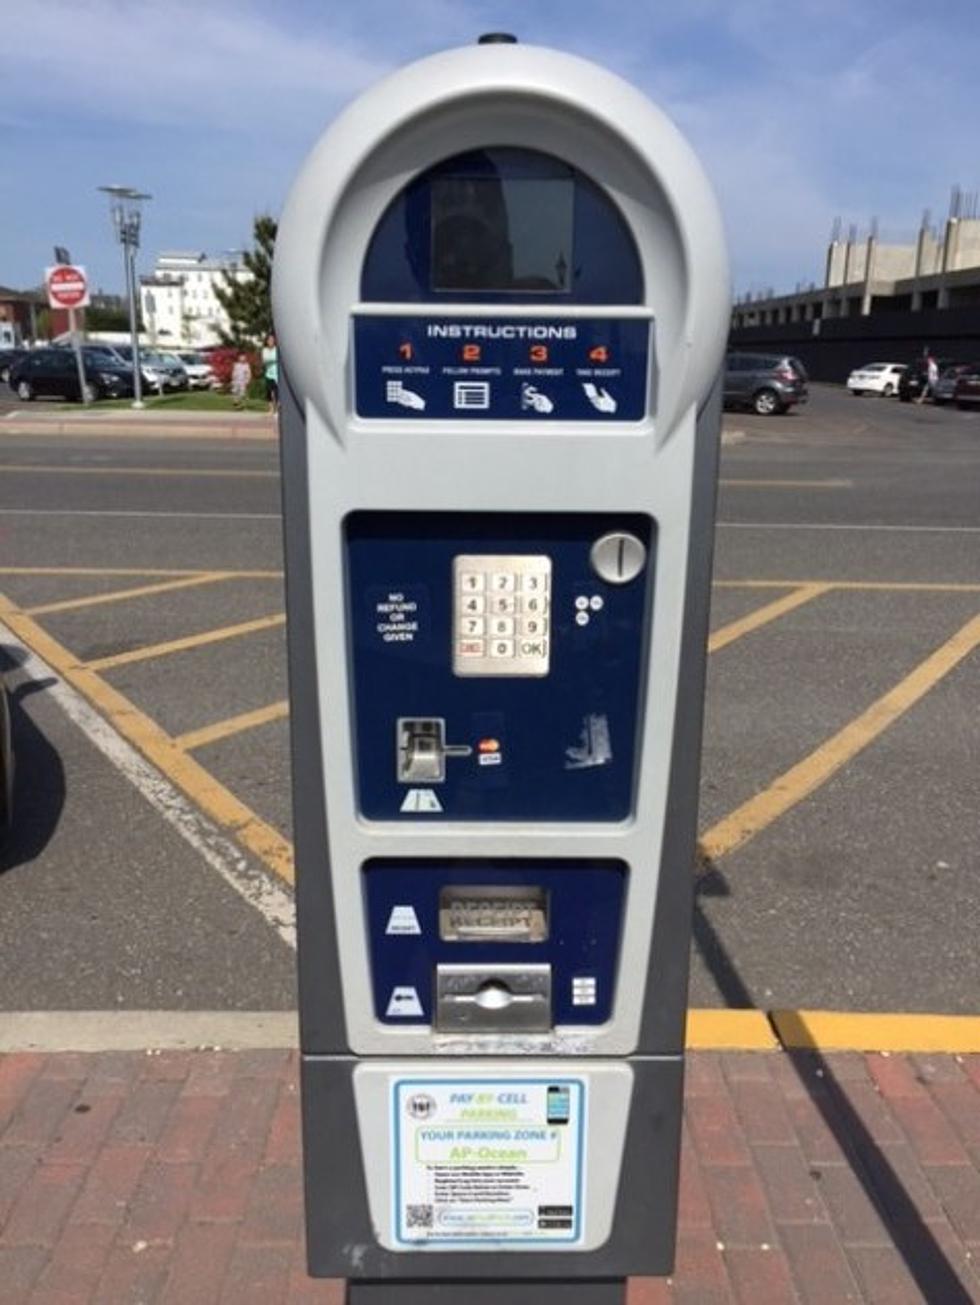 Parking meters in Asbury Park repaired following system-wide outage